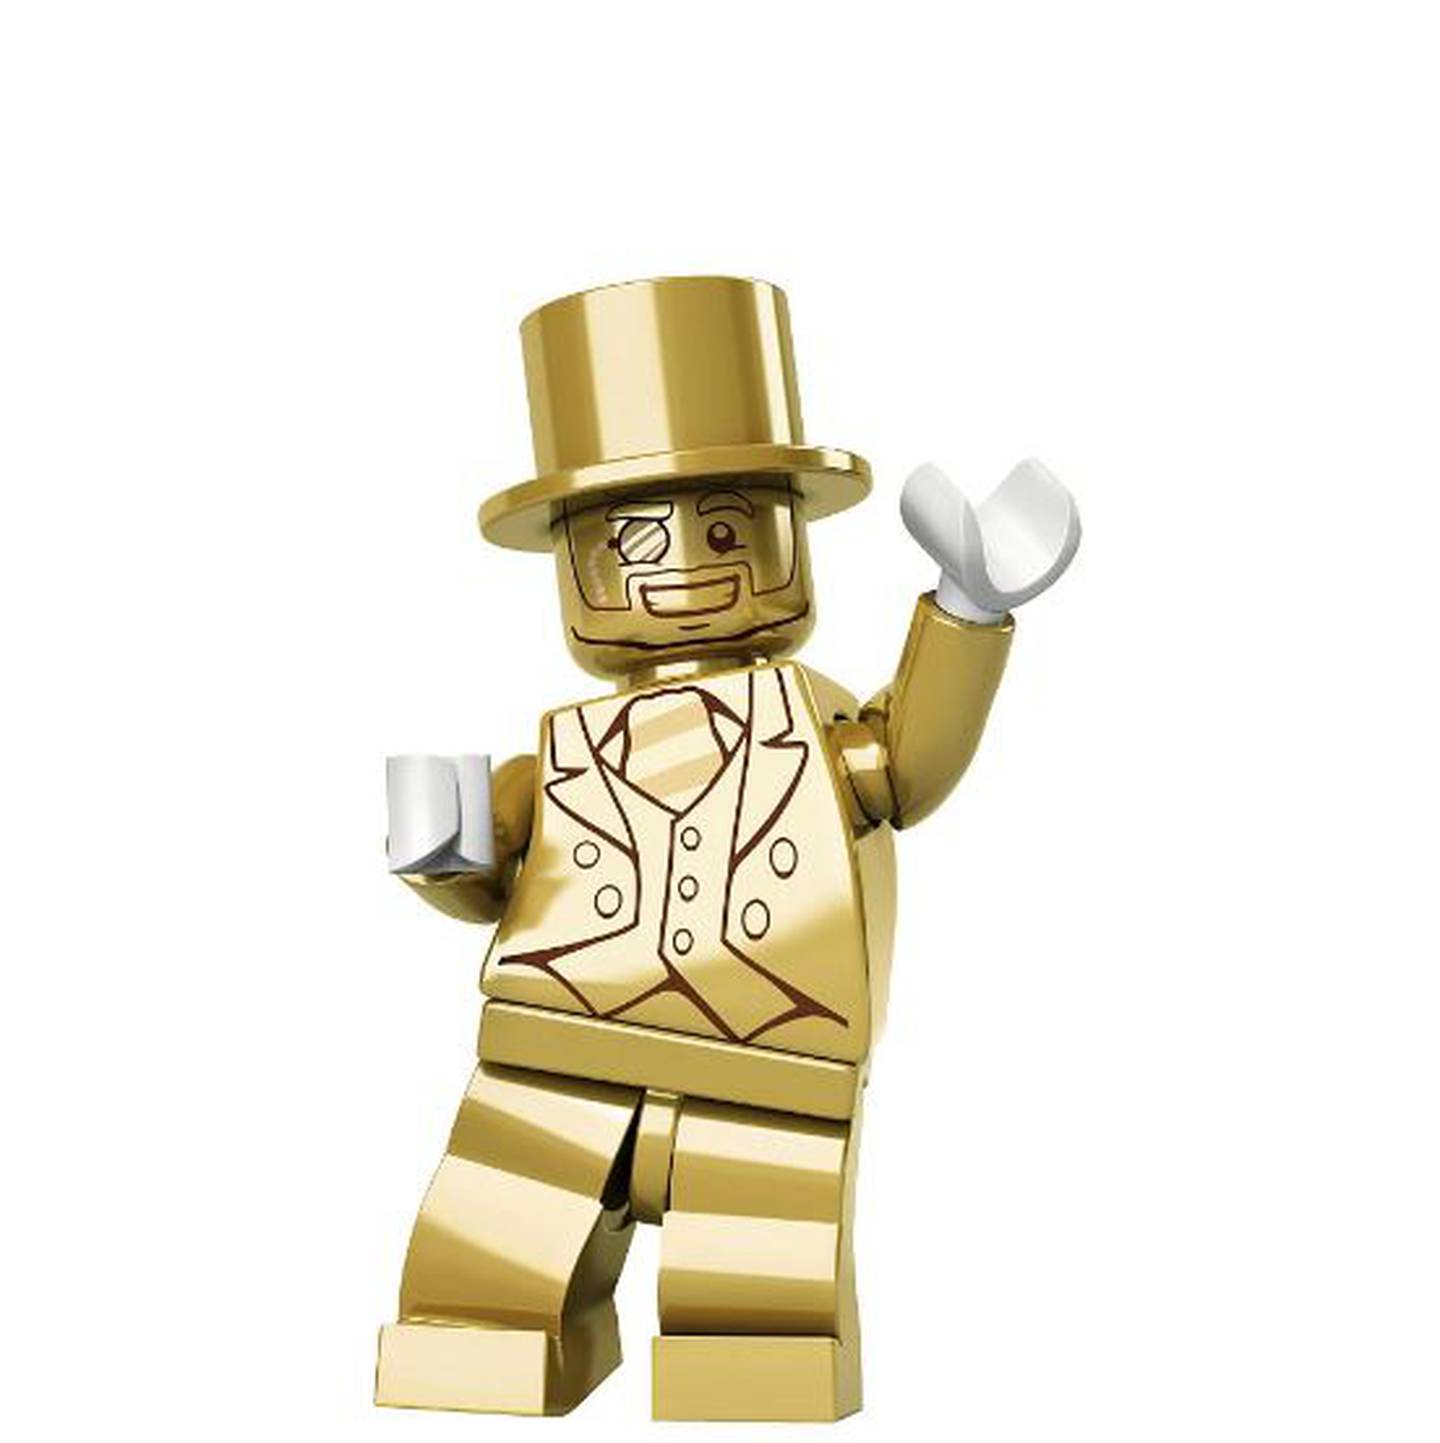 The original figure was marketed in 2013.